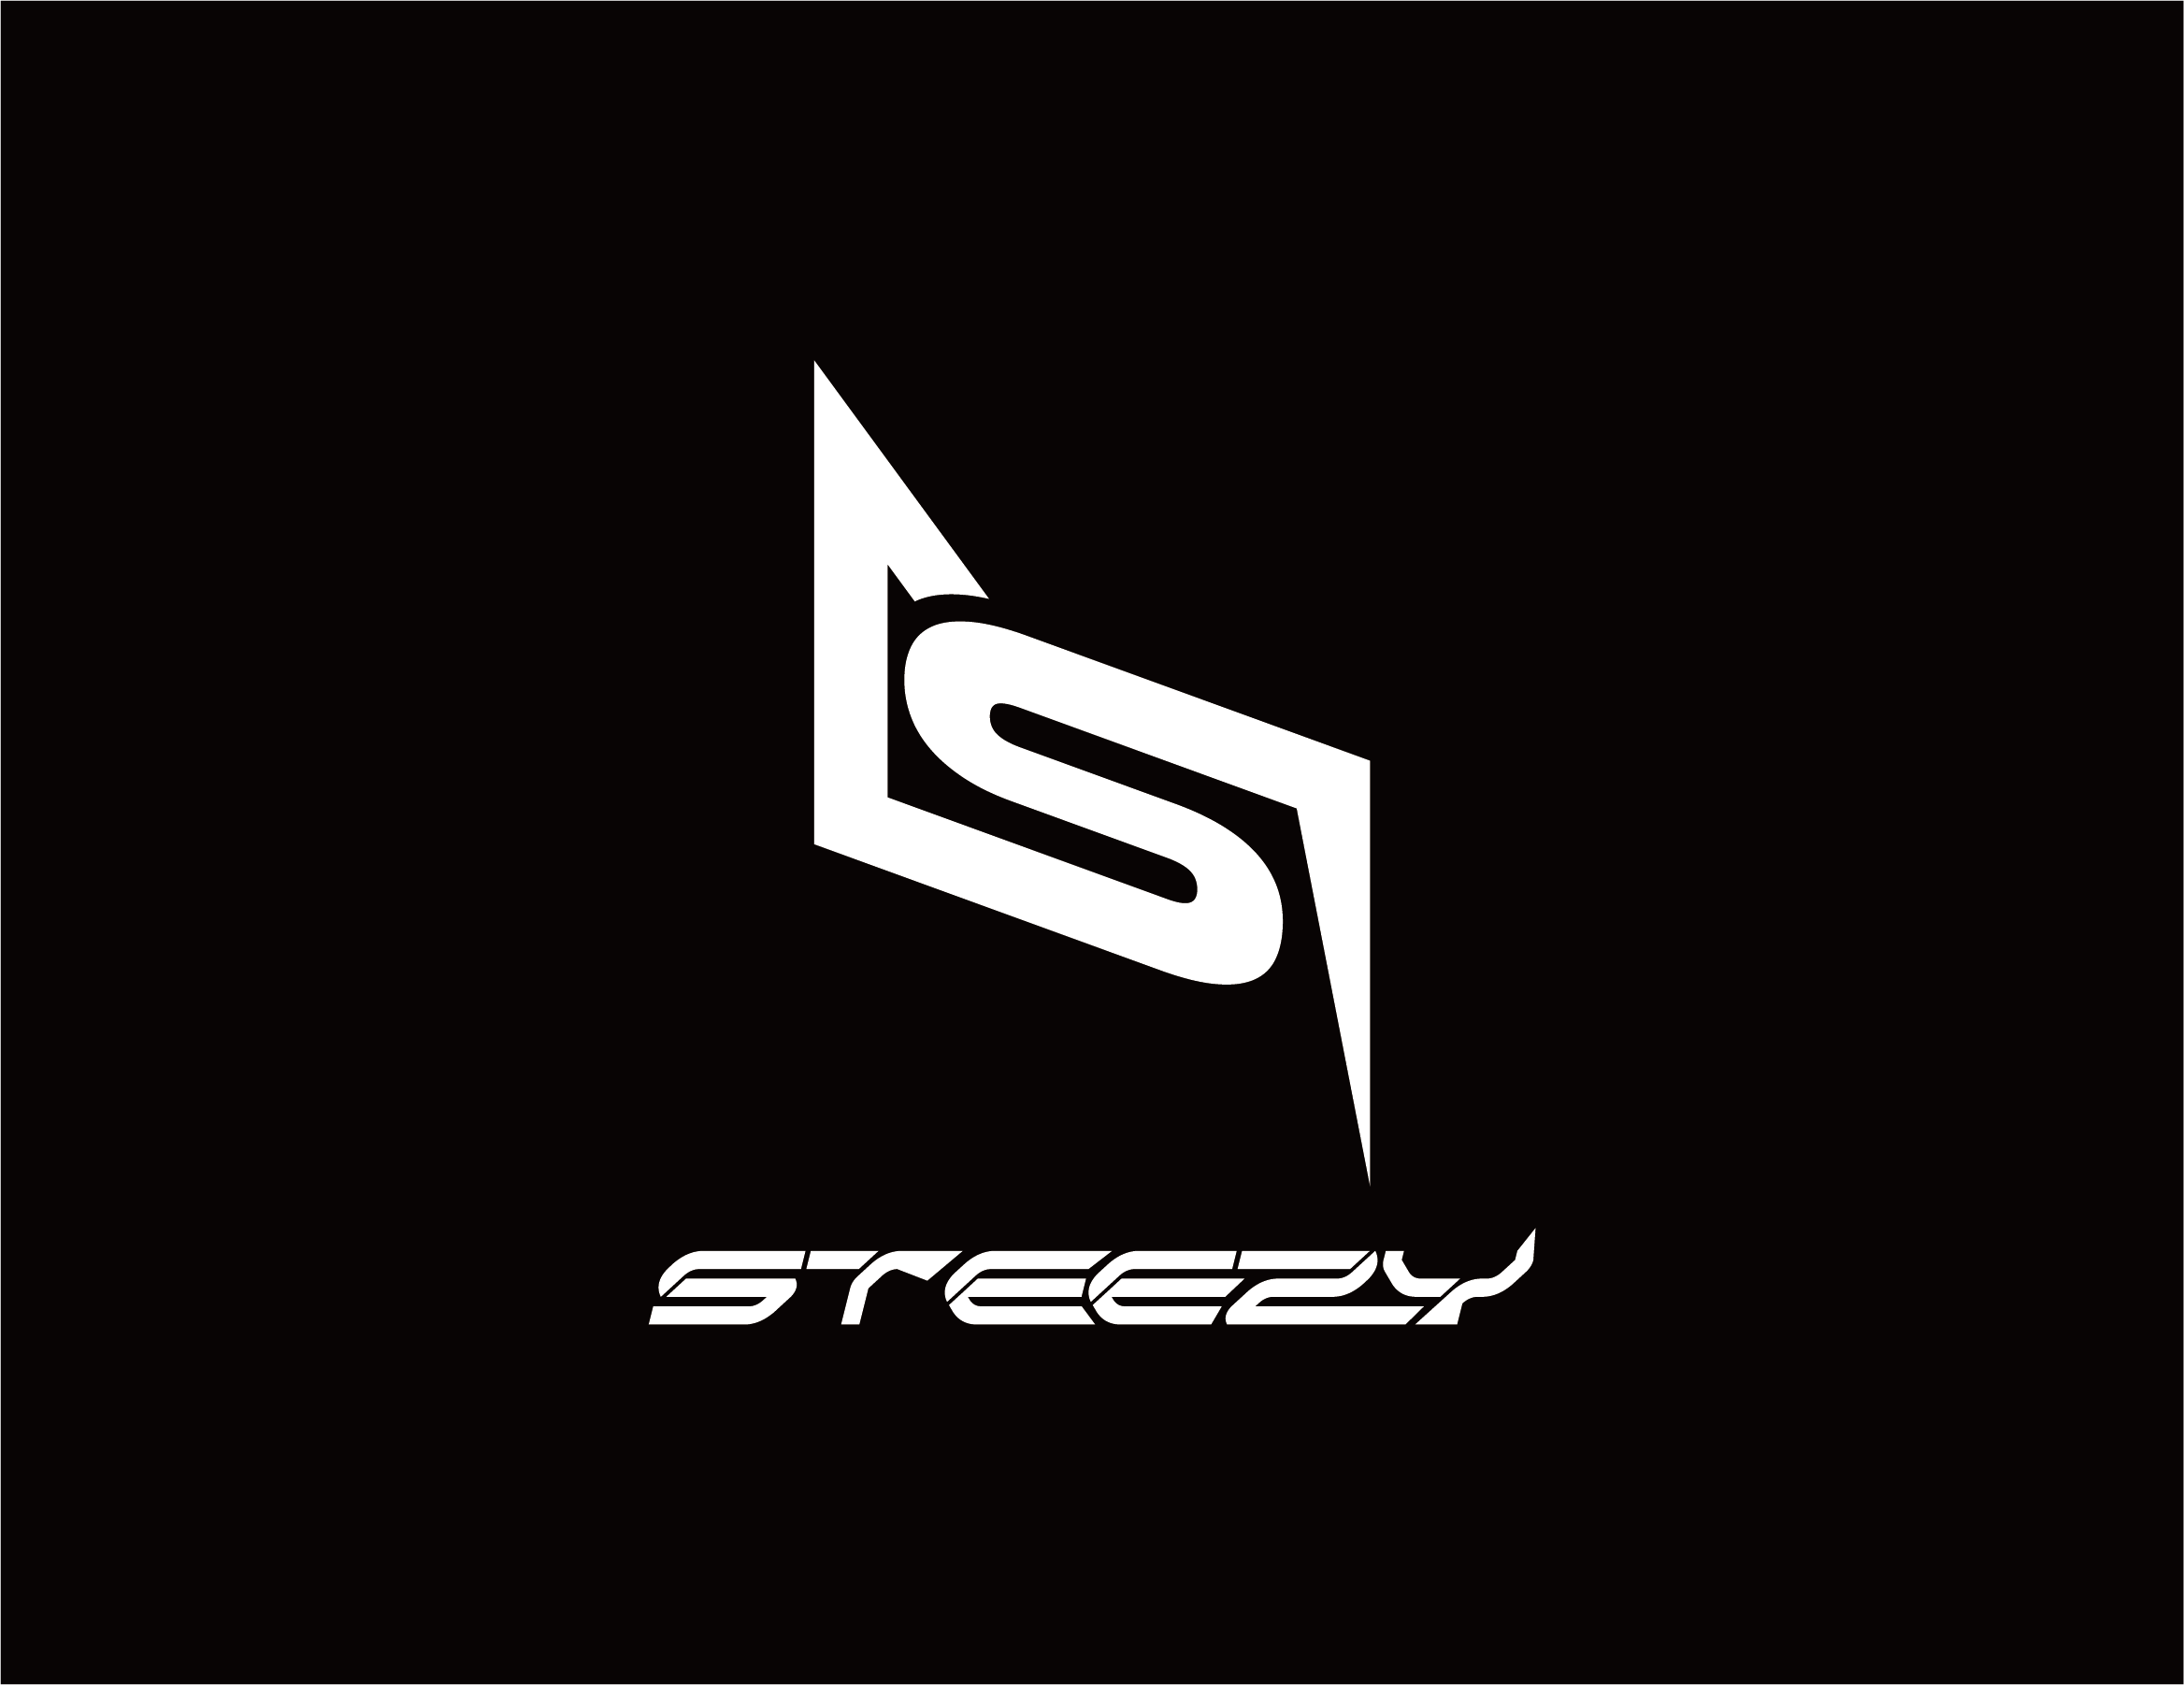 STEEZY OFFICIAL